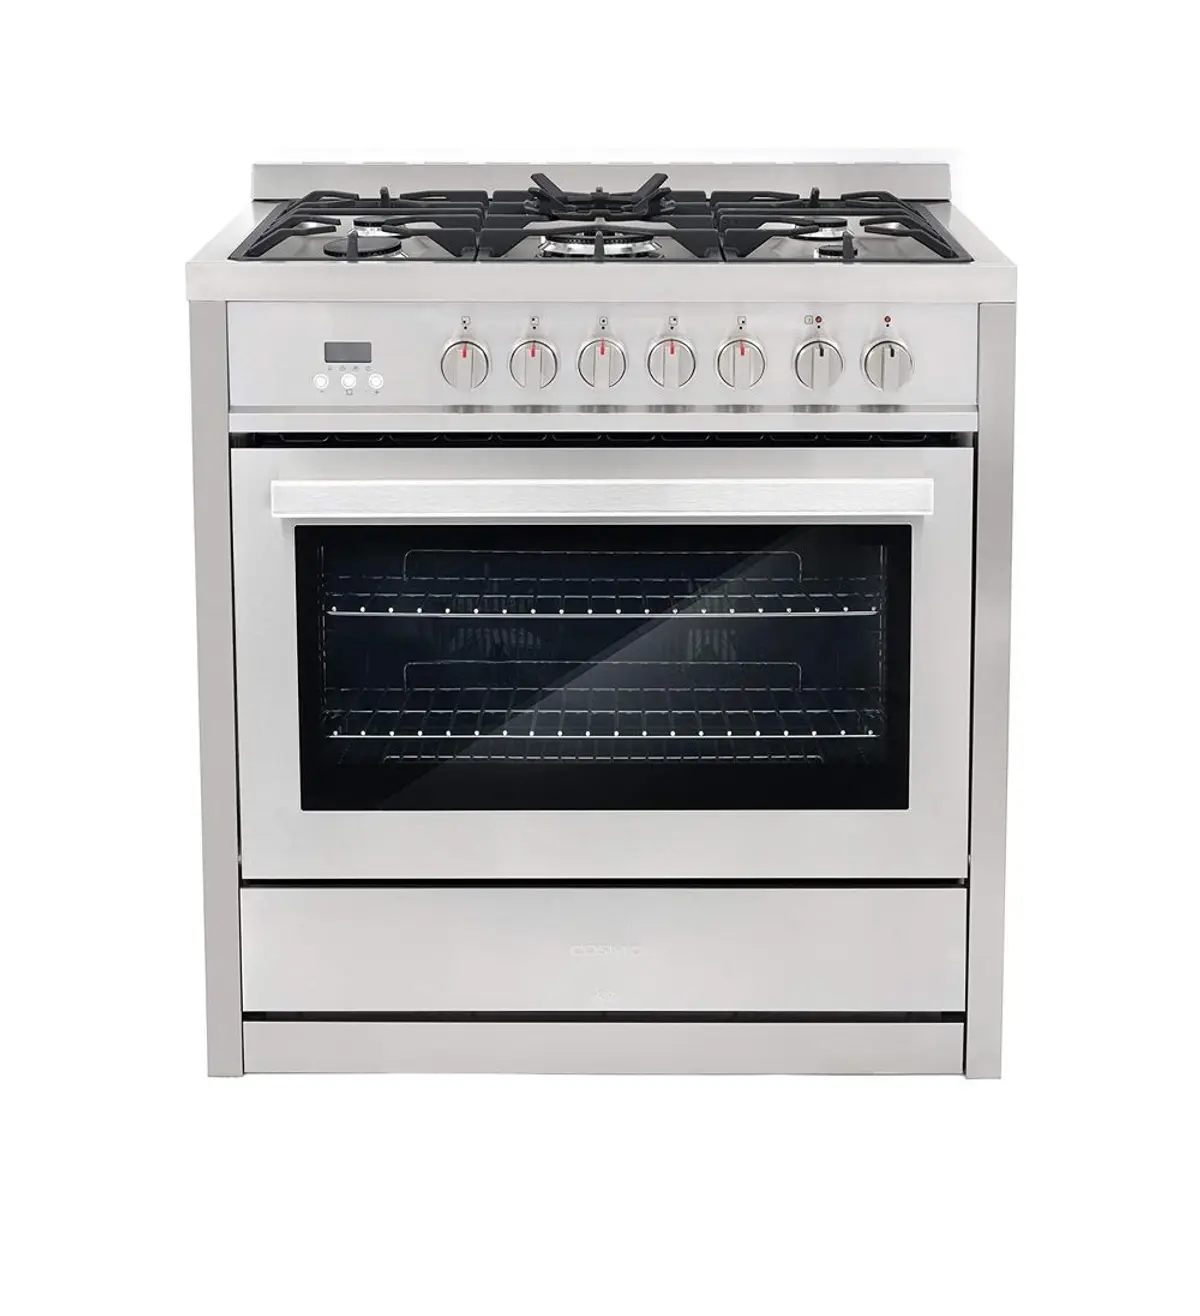 Cosmo 36 Inch Dual Fuel Range review